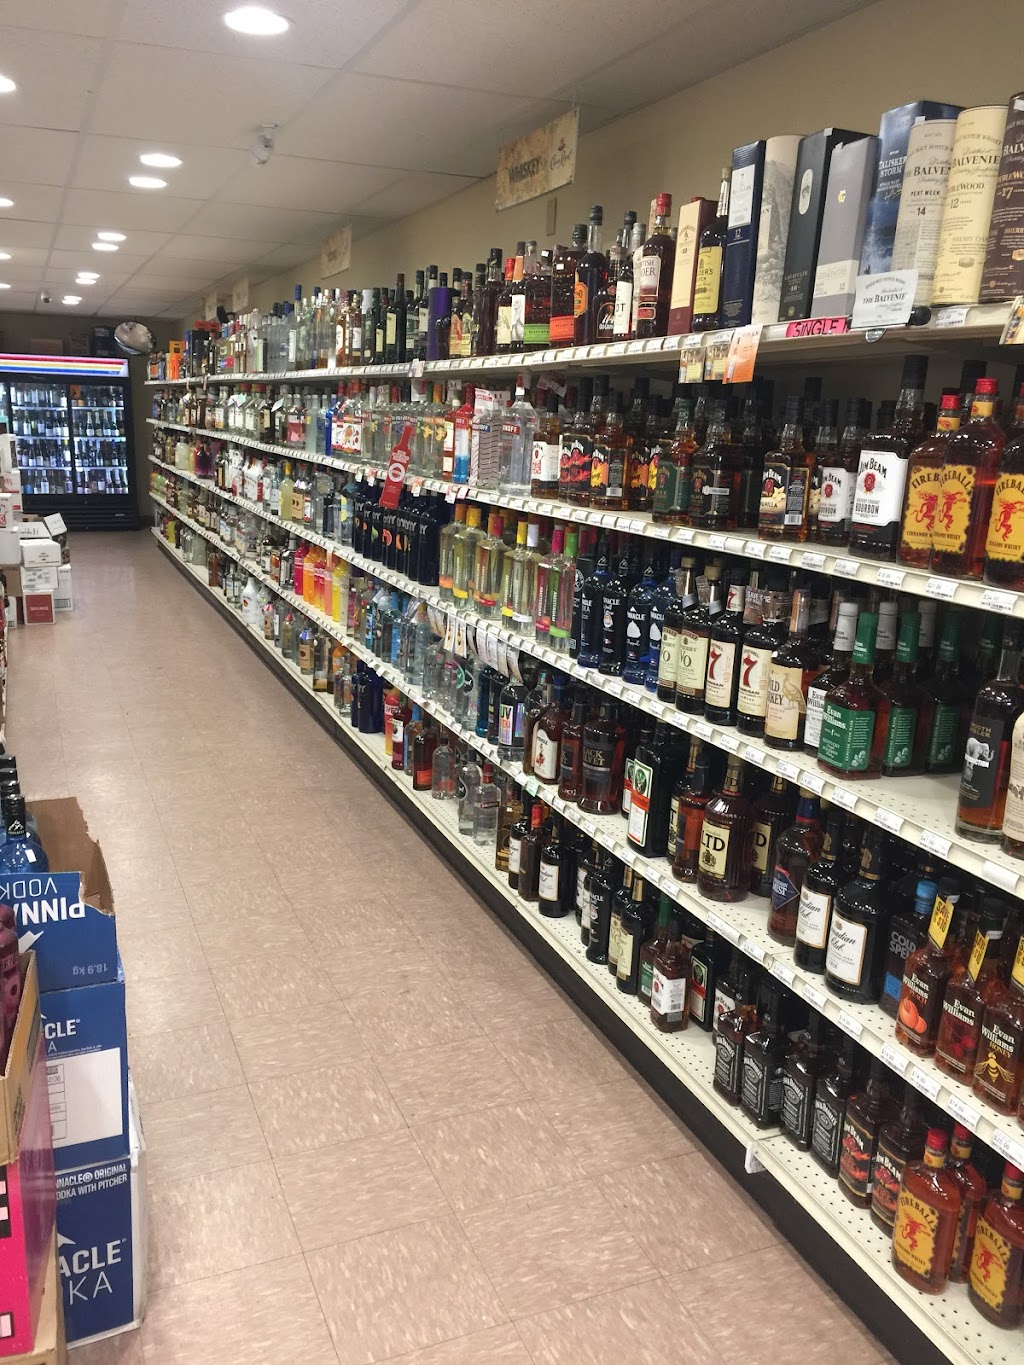 Bottle & Cork Discount Wine & Liquor | State Route 9W, 11834 Rte 9W, West Coxsackie, NY 12192 | Phone: (518) 731-1050